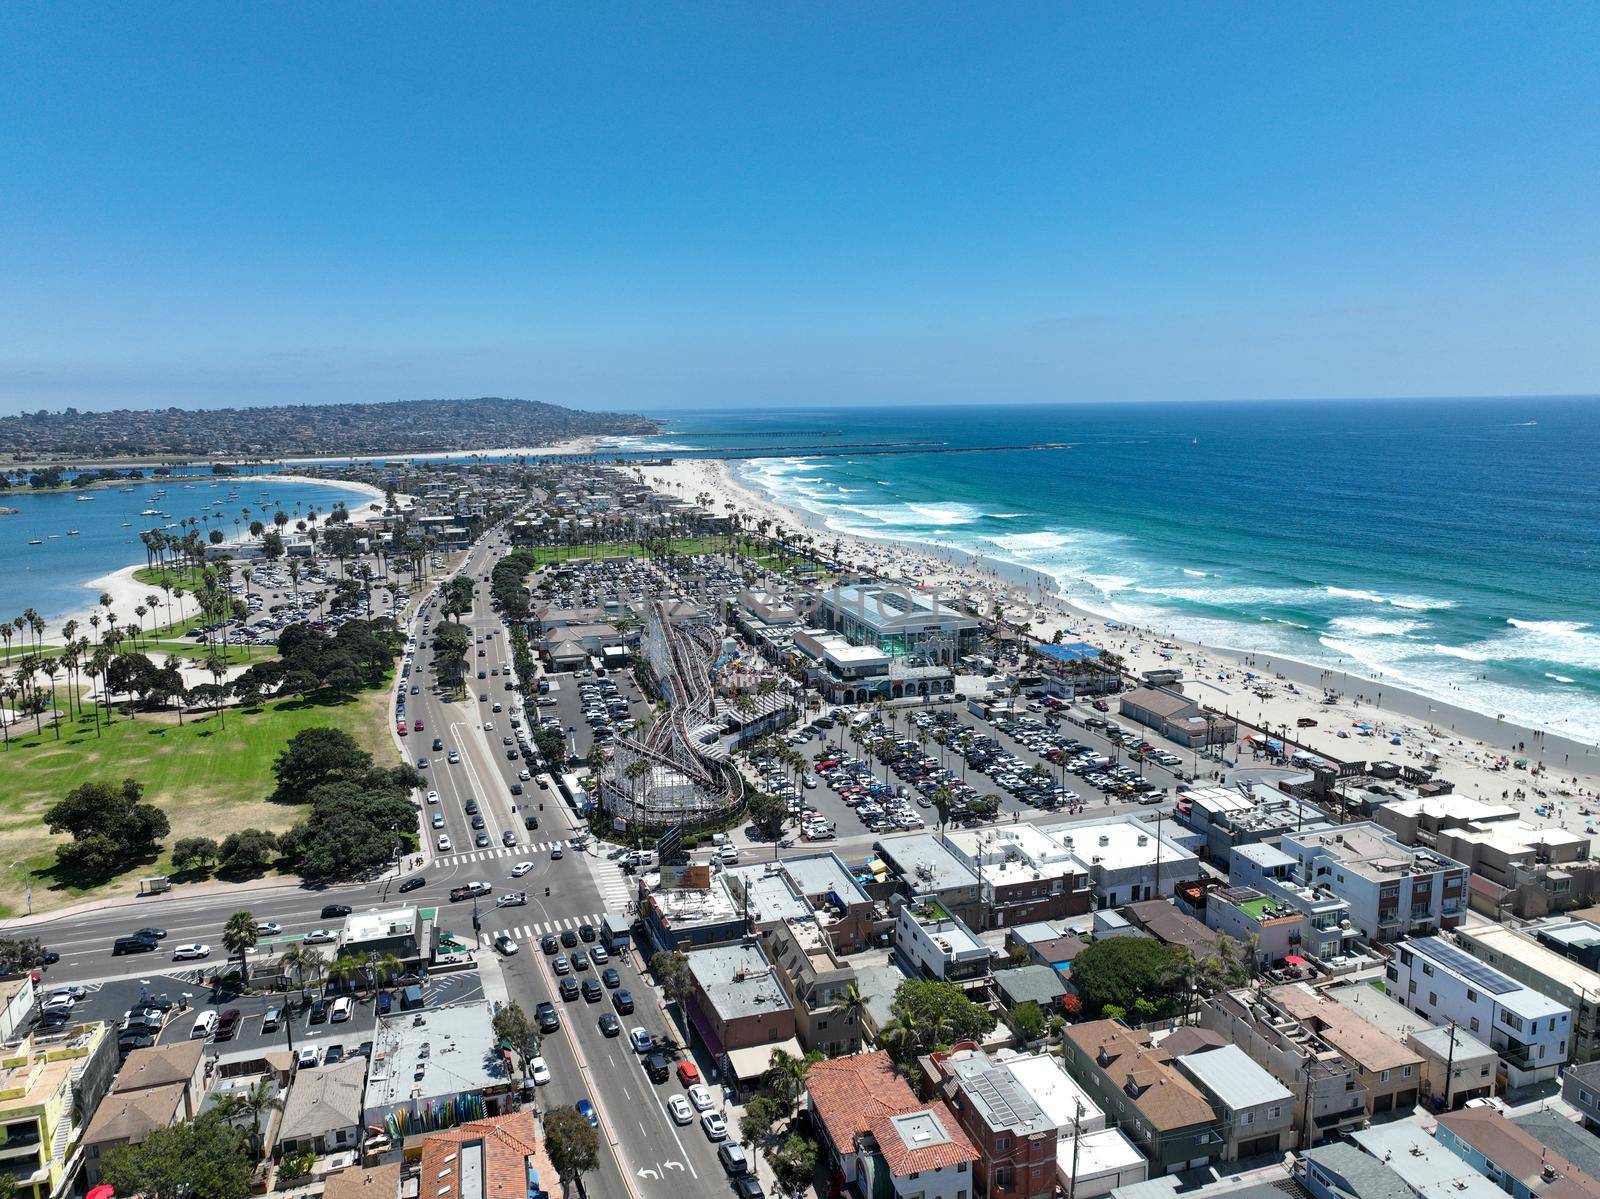 Aerial view of Mission Bay and beach in San Diego, California. USA. Famous tourist destination